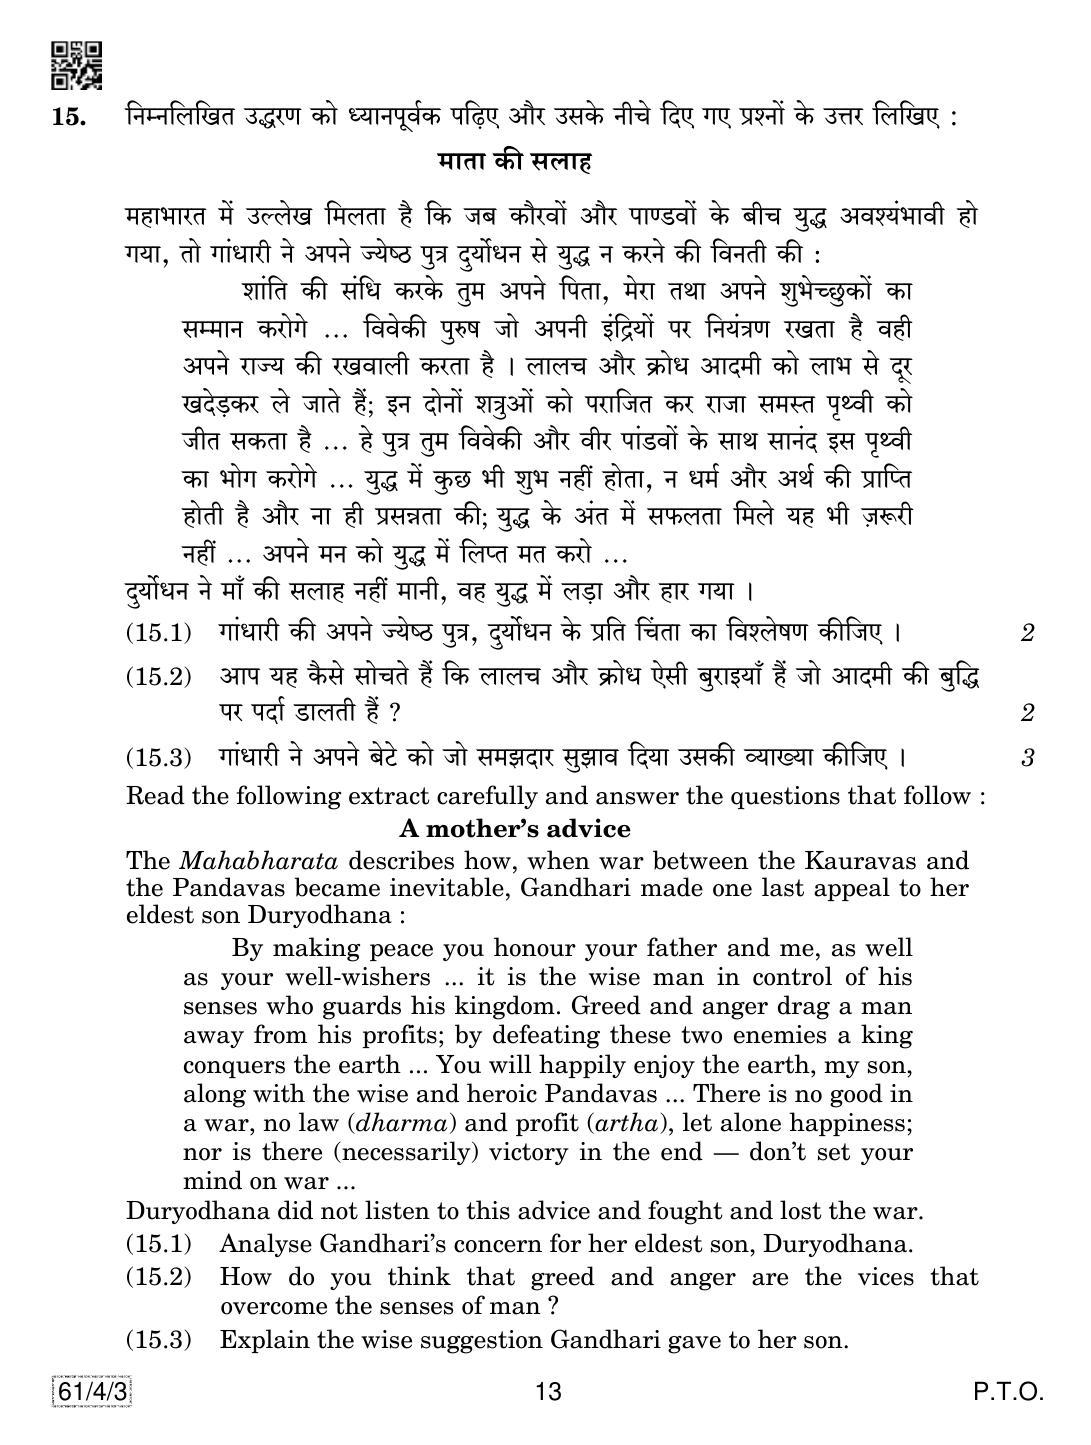 CBSE Class 12 61-4-3 History 2019 Question Paper - Page 13